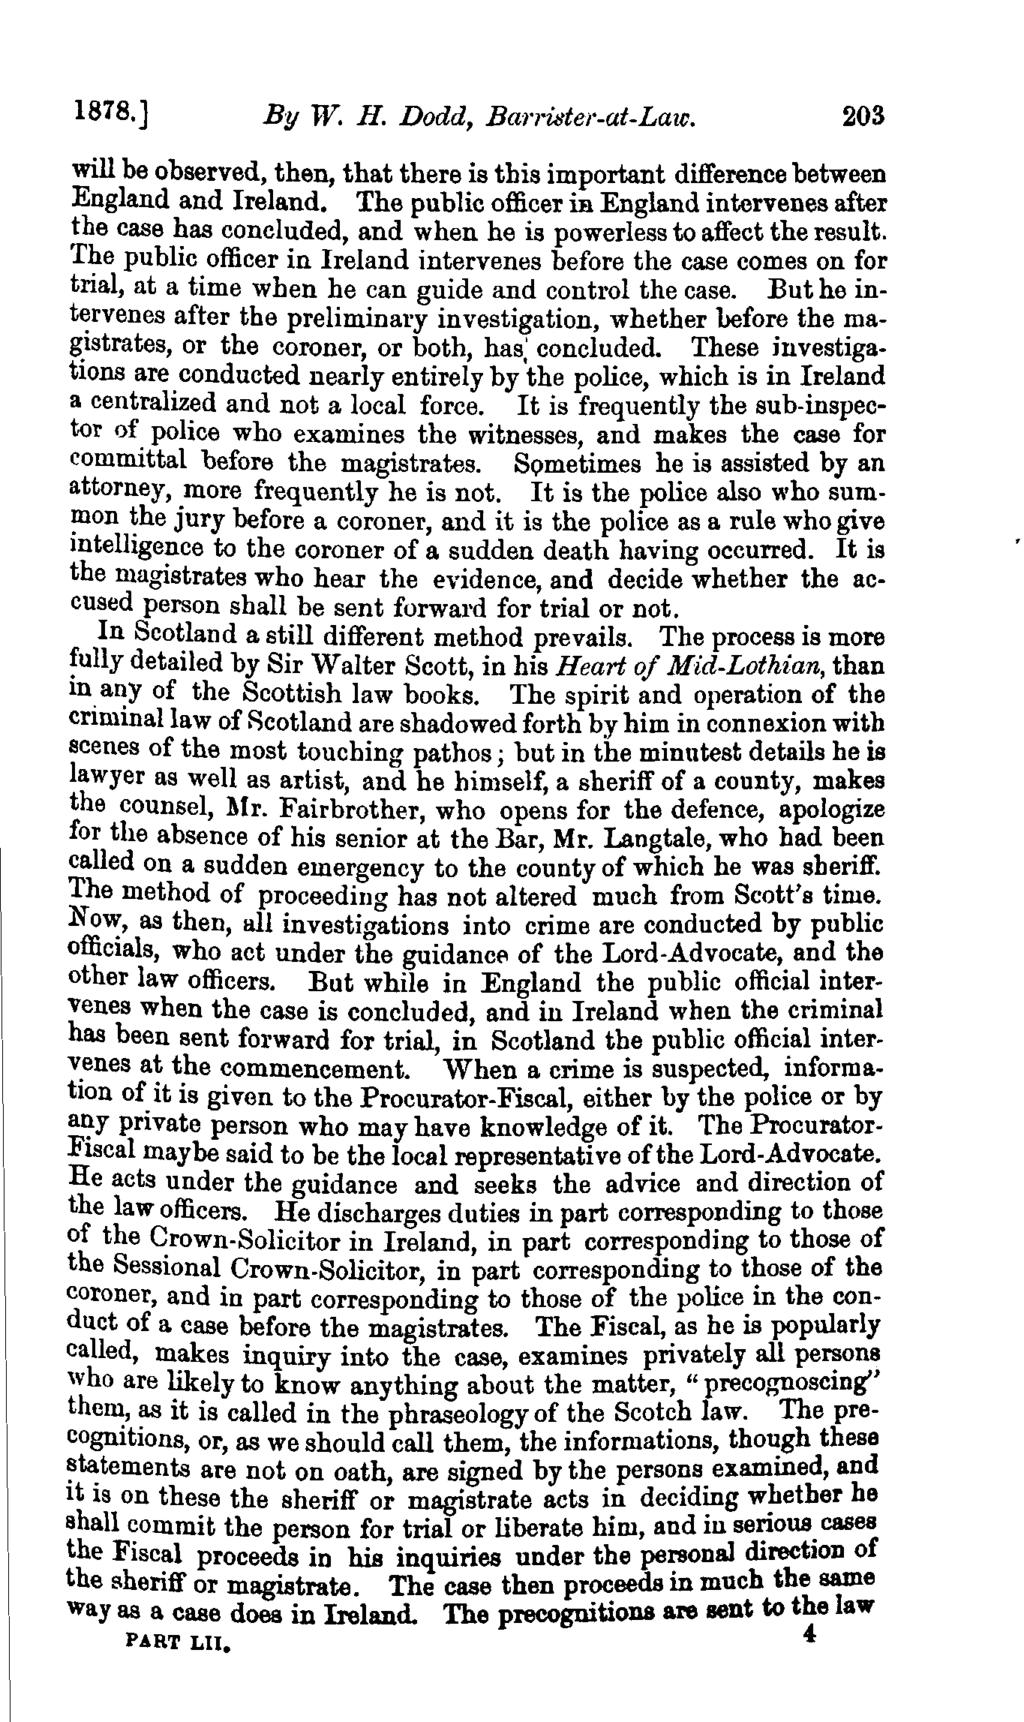 1878.] By W. H. Dodd, Barrister-at-Law. 203 will be observed, then, that there is this important difference between England and Ireland.